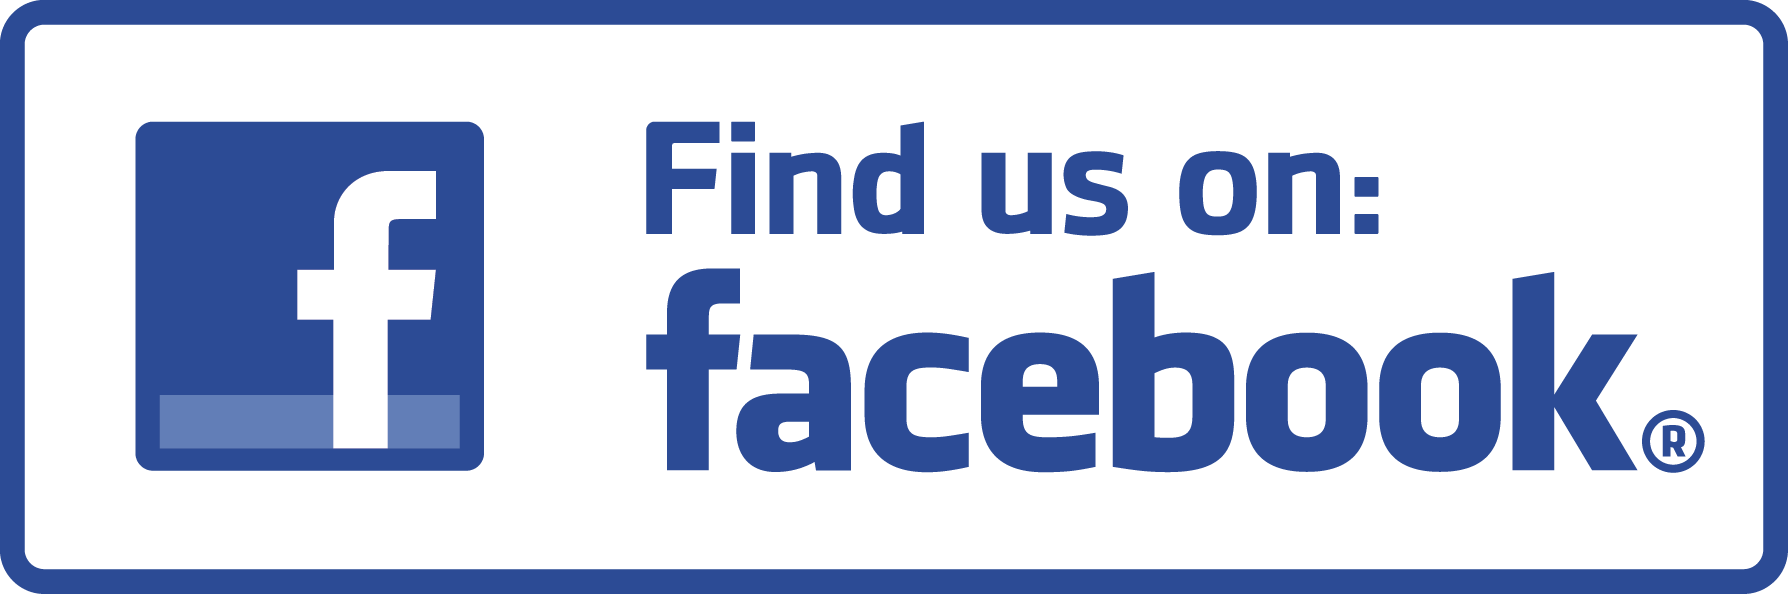 Join Us On Facebook Logo - Find-us-on-Facebook - Thurston County Chamber of Commerce